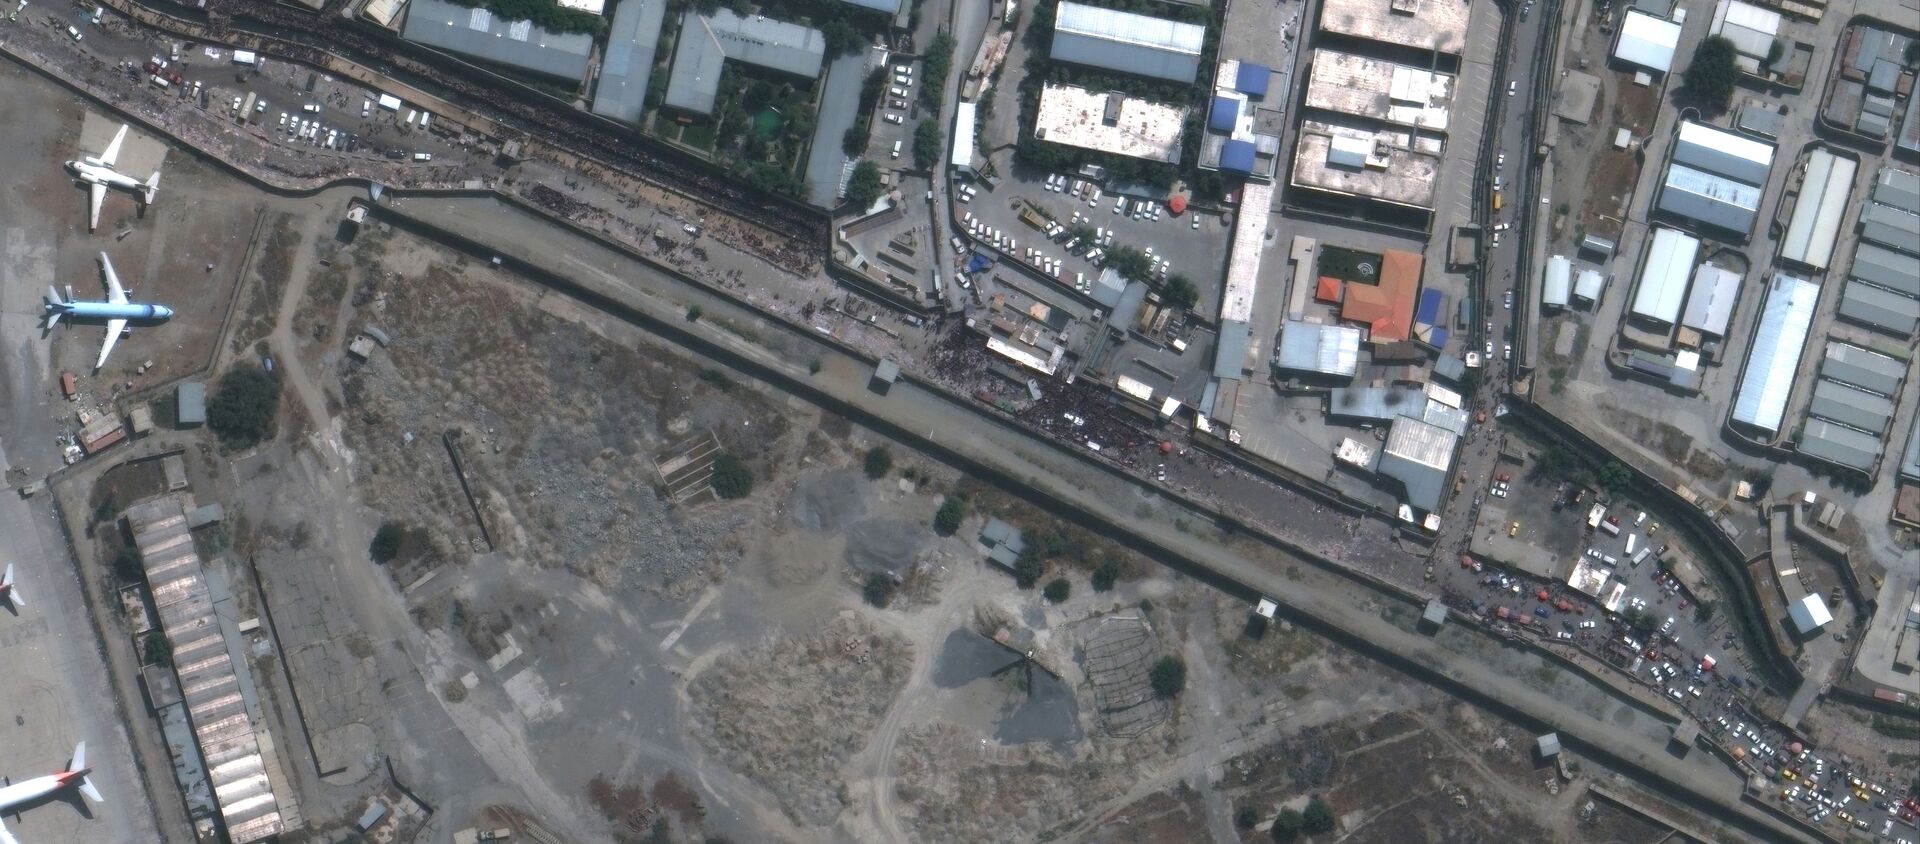 An overview of the Abbey Gate at Hamid Karzai International Airport, in Kabul, Afghanistan August 23, 2021, in this satellite image obtained by Reuters on August 26, 2021. - Sputnik International, 1920